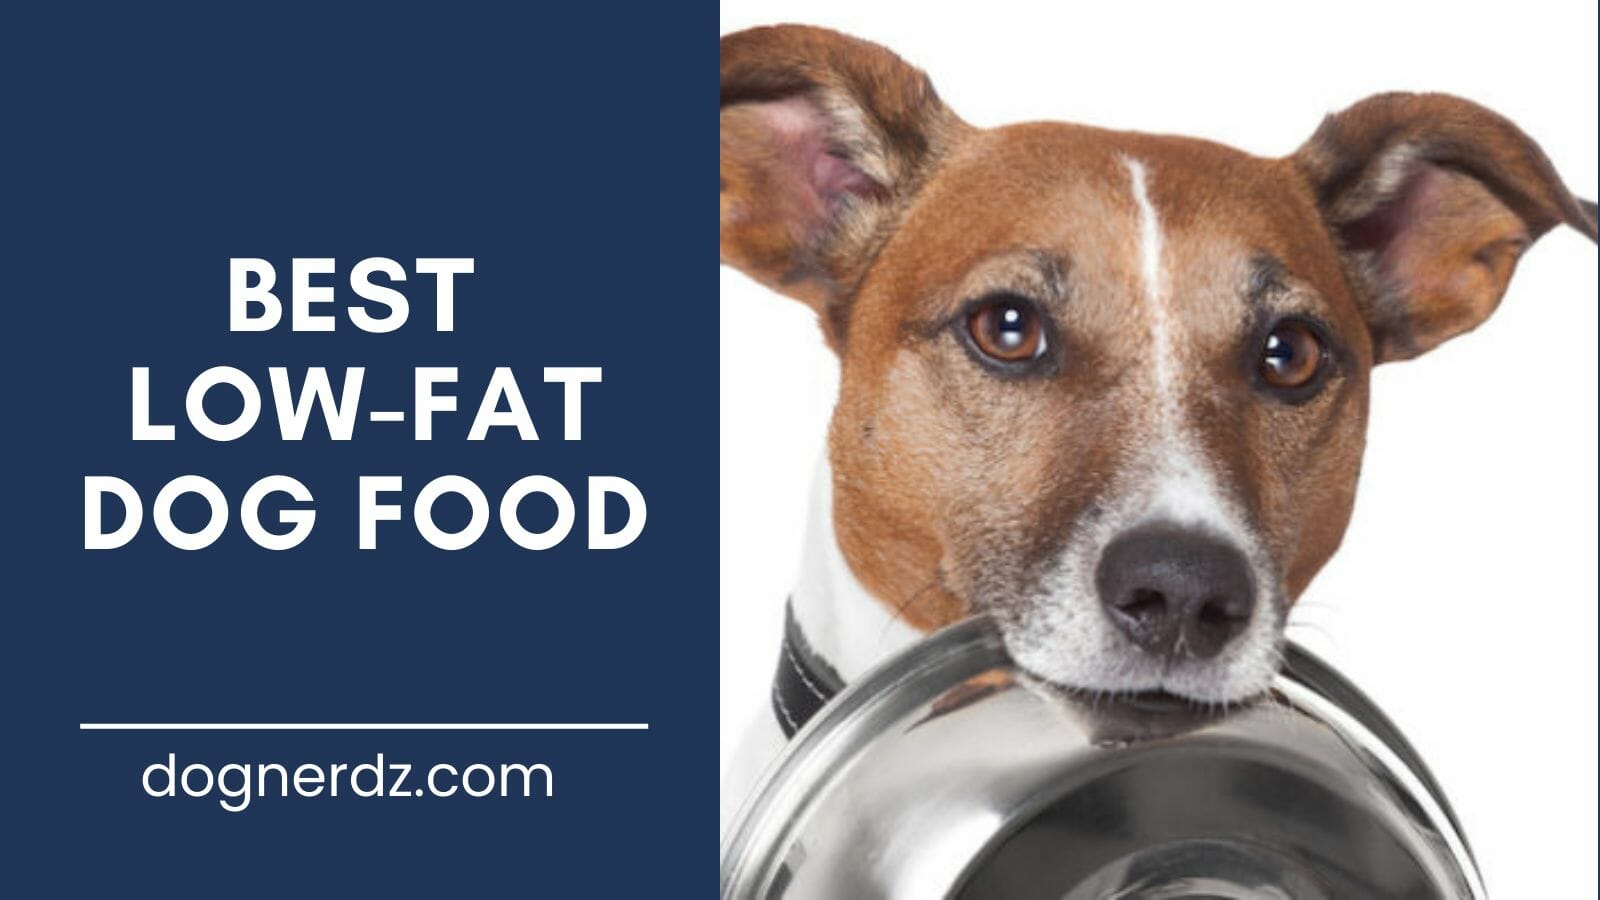 review of the best low-fat dog food